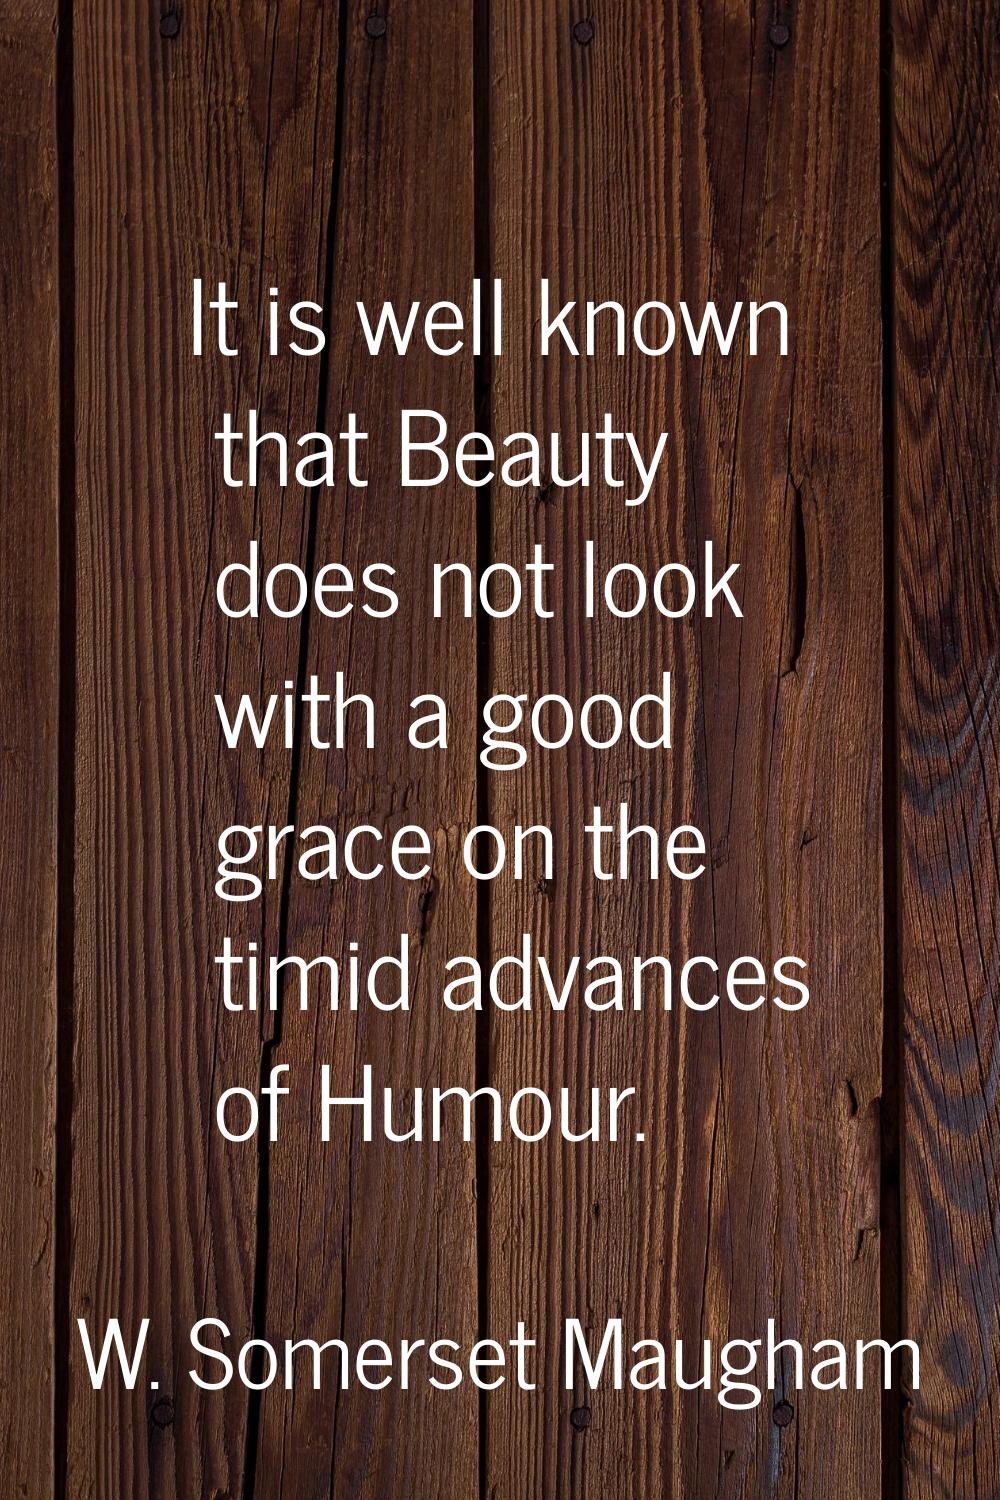 It is well known that Beauty does not look with a good grace on the timid advances of Humour.